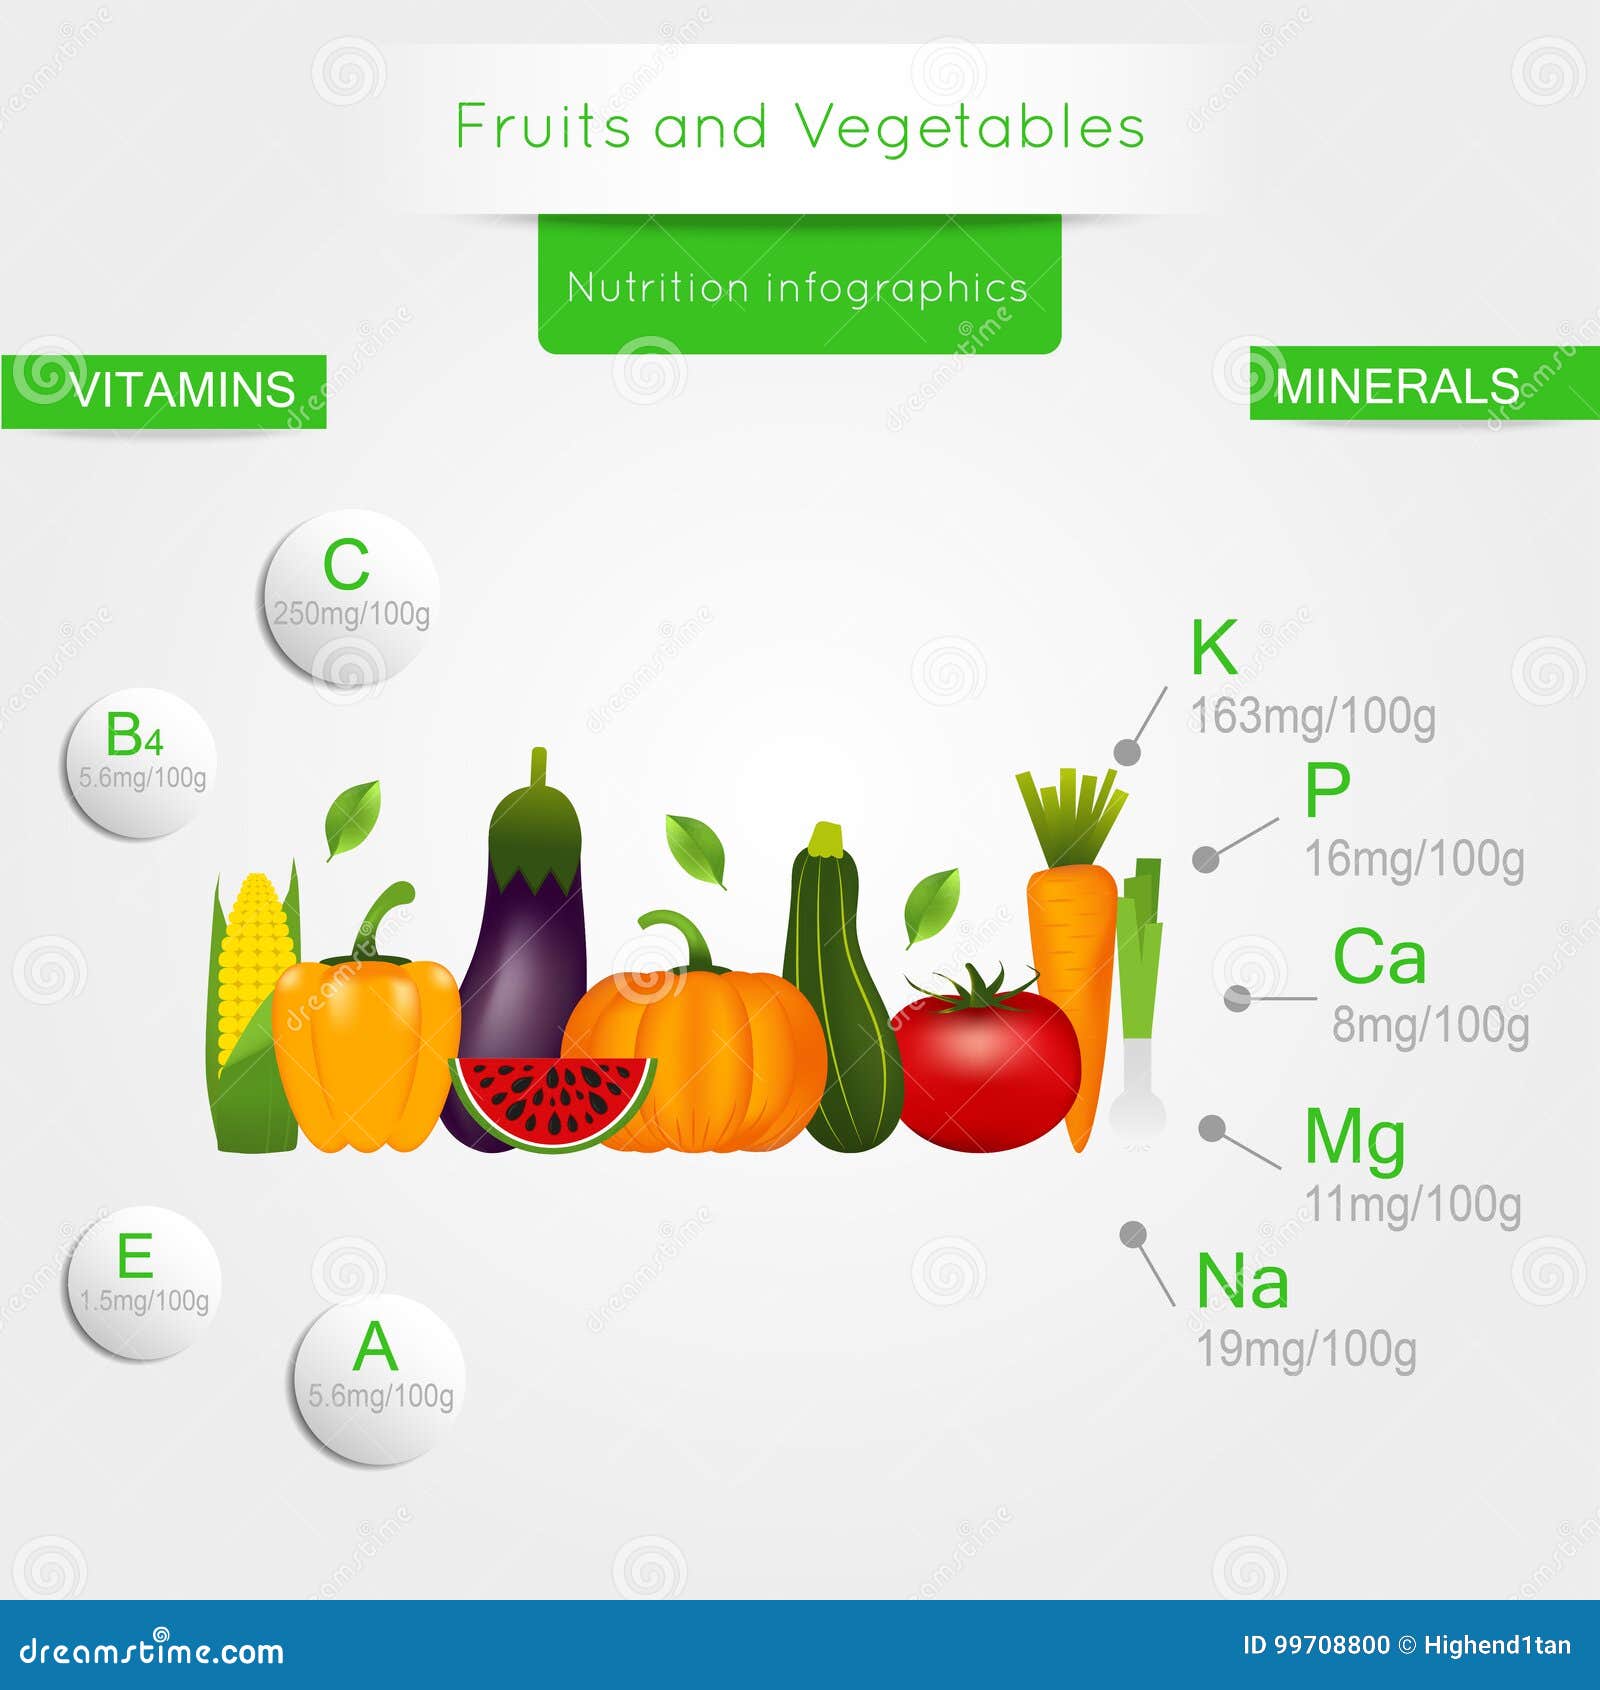 Benefits Of Fruits And Vegetables Chart